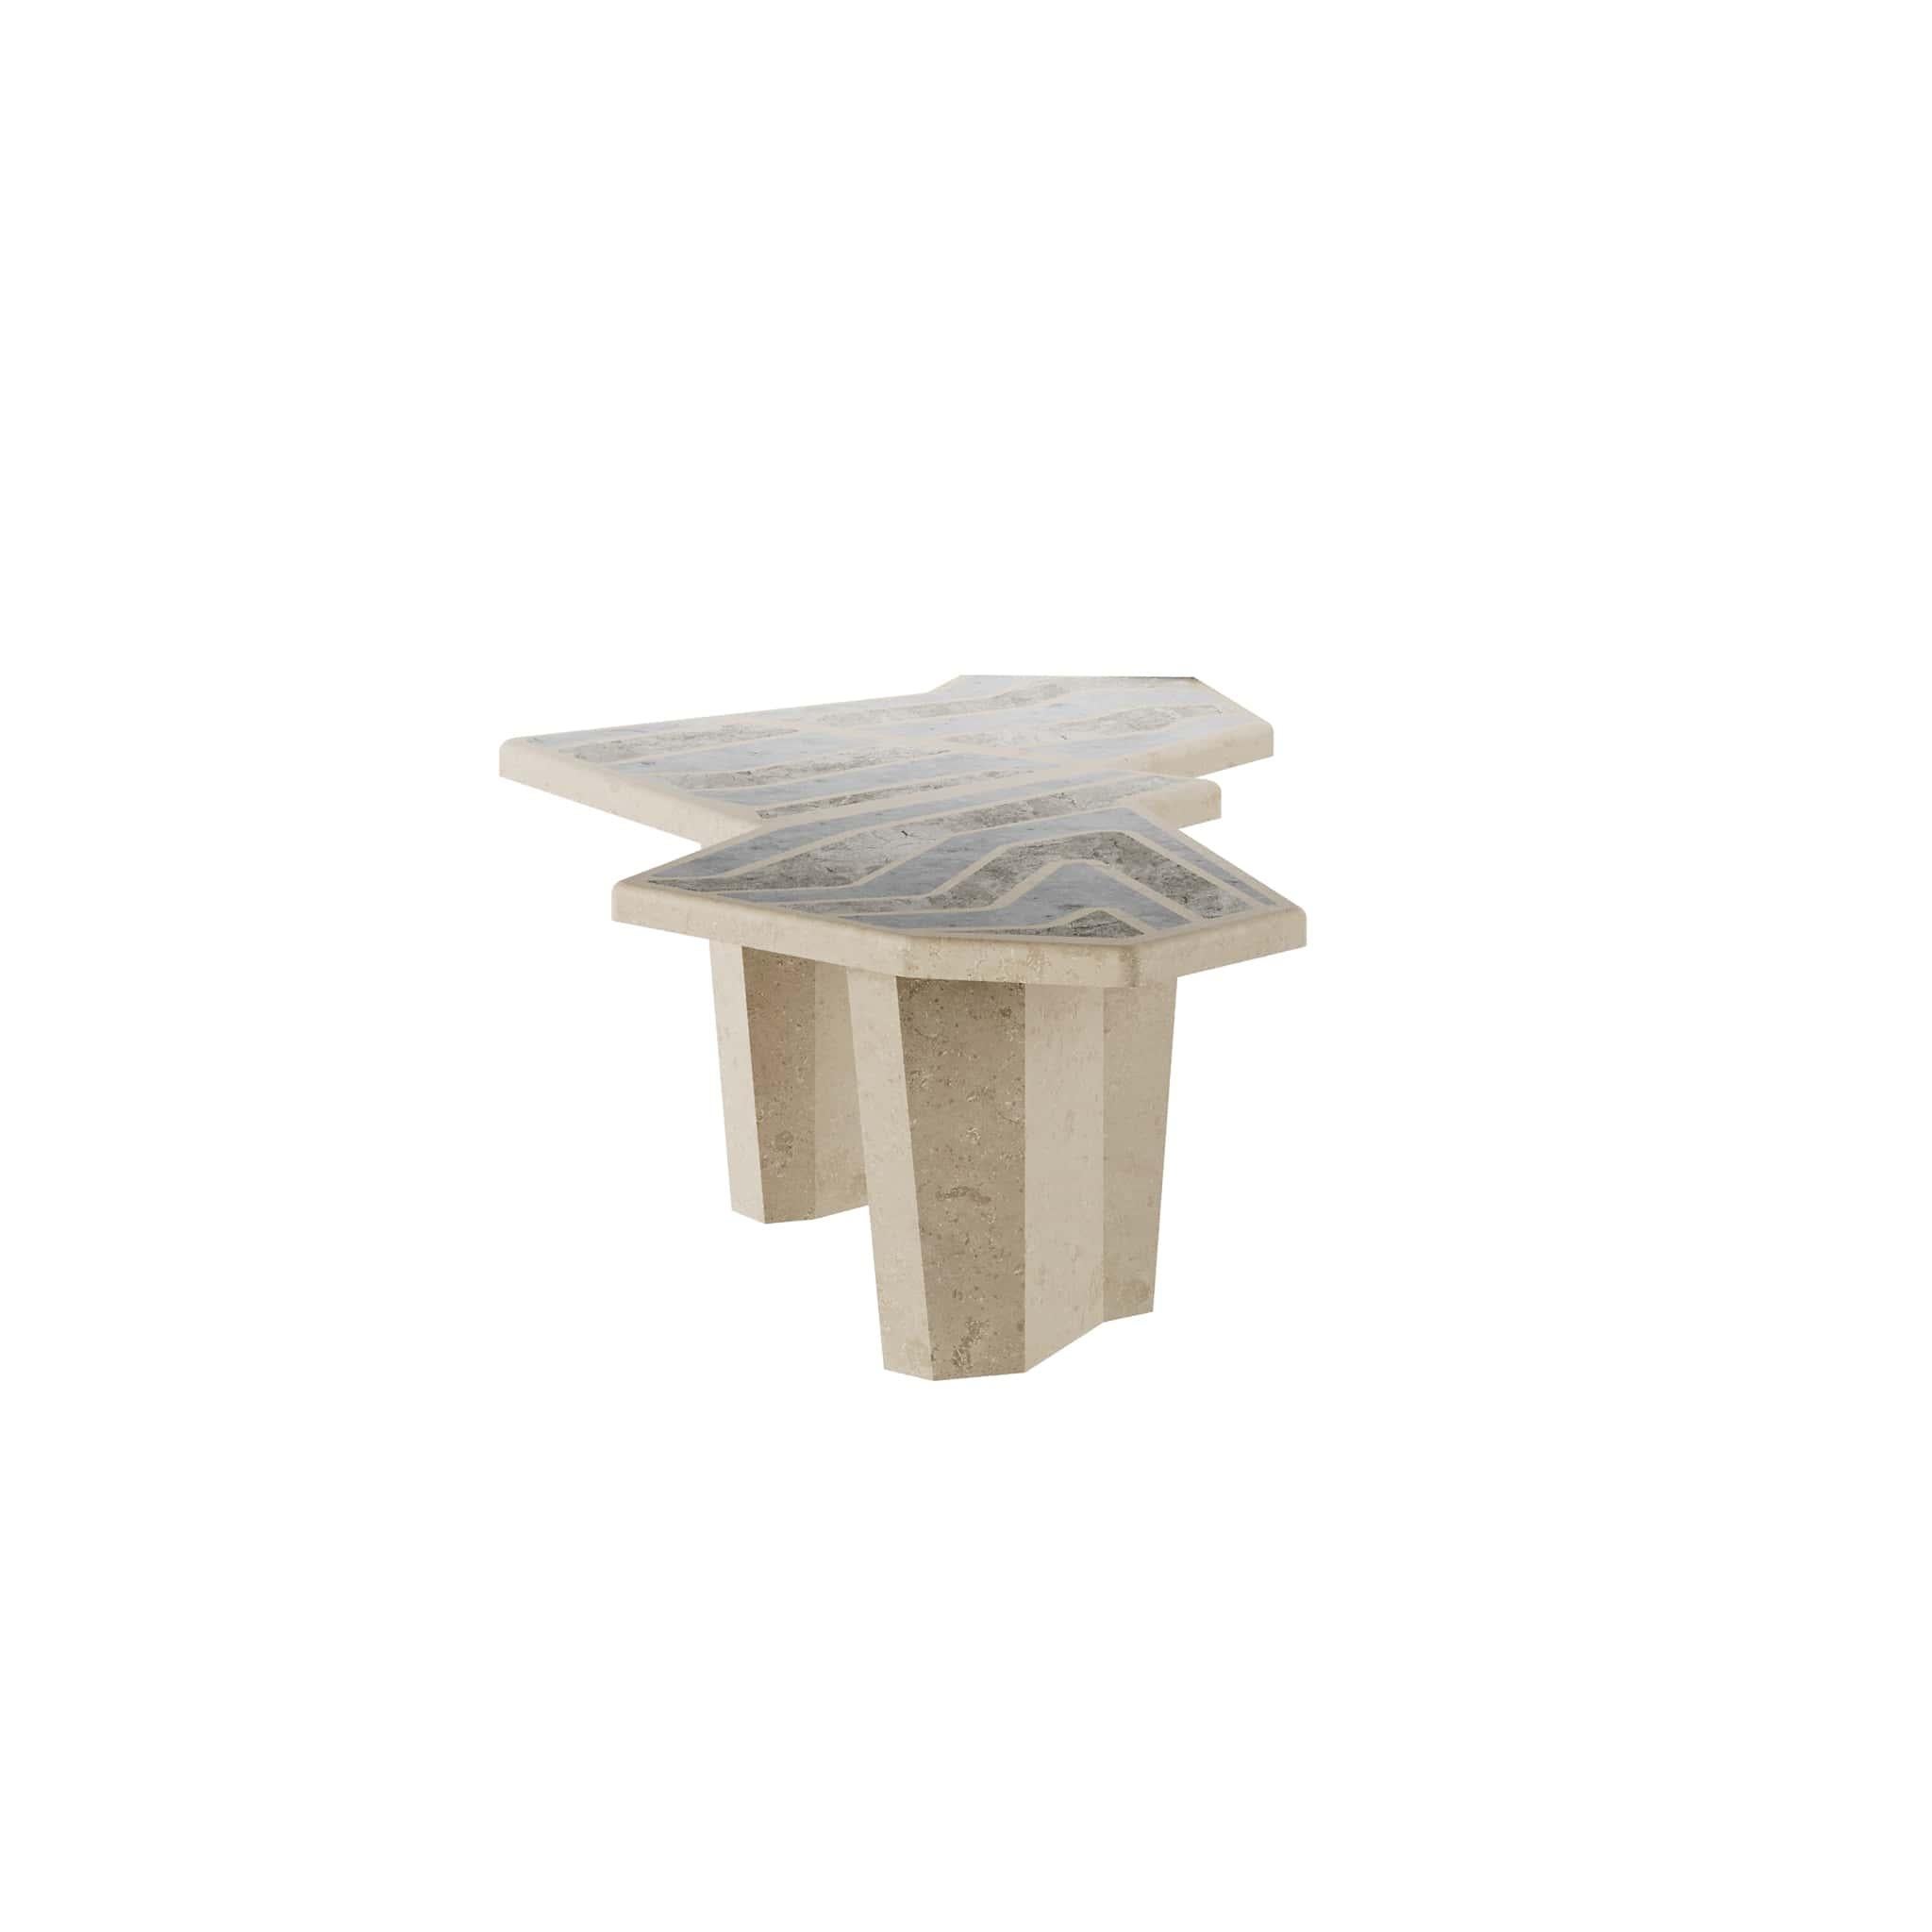 Utah Center Table Natural is a unique modern coffee table inspired by the seductive and peculiar shapes of the Moab pools in the Utah Desert. This nature-inspired marble coffee table was designed to be the ultimate item to suit any outdoor or indoor